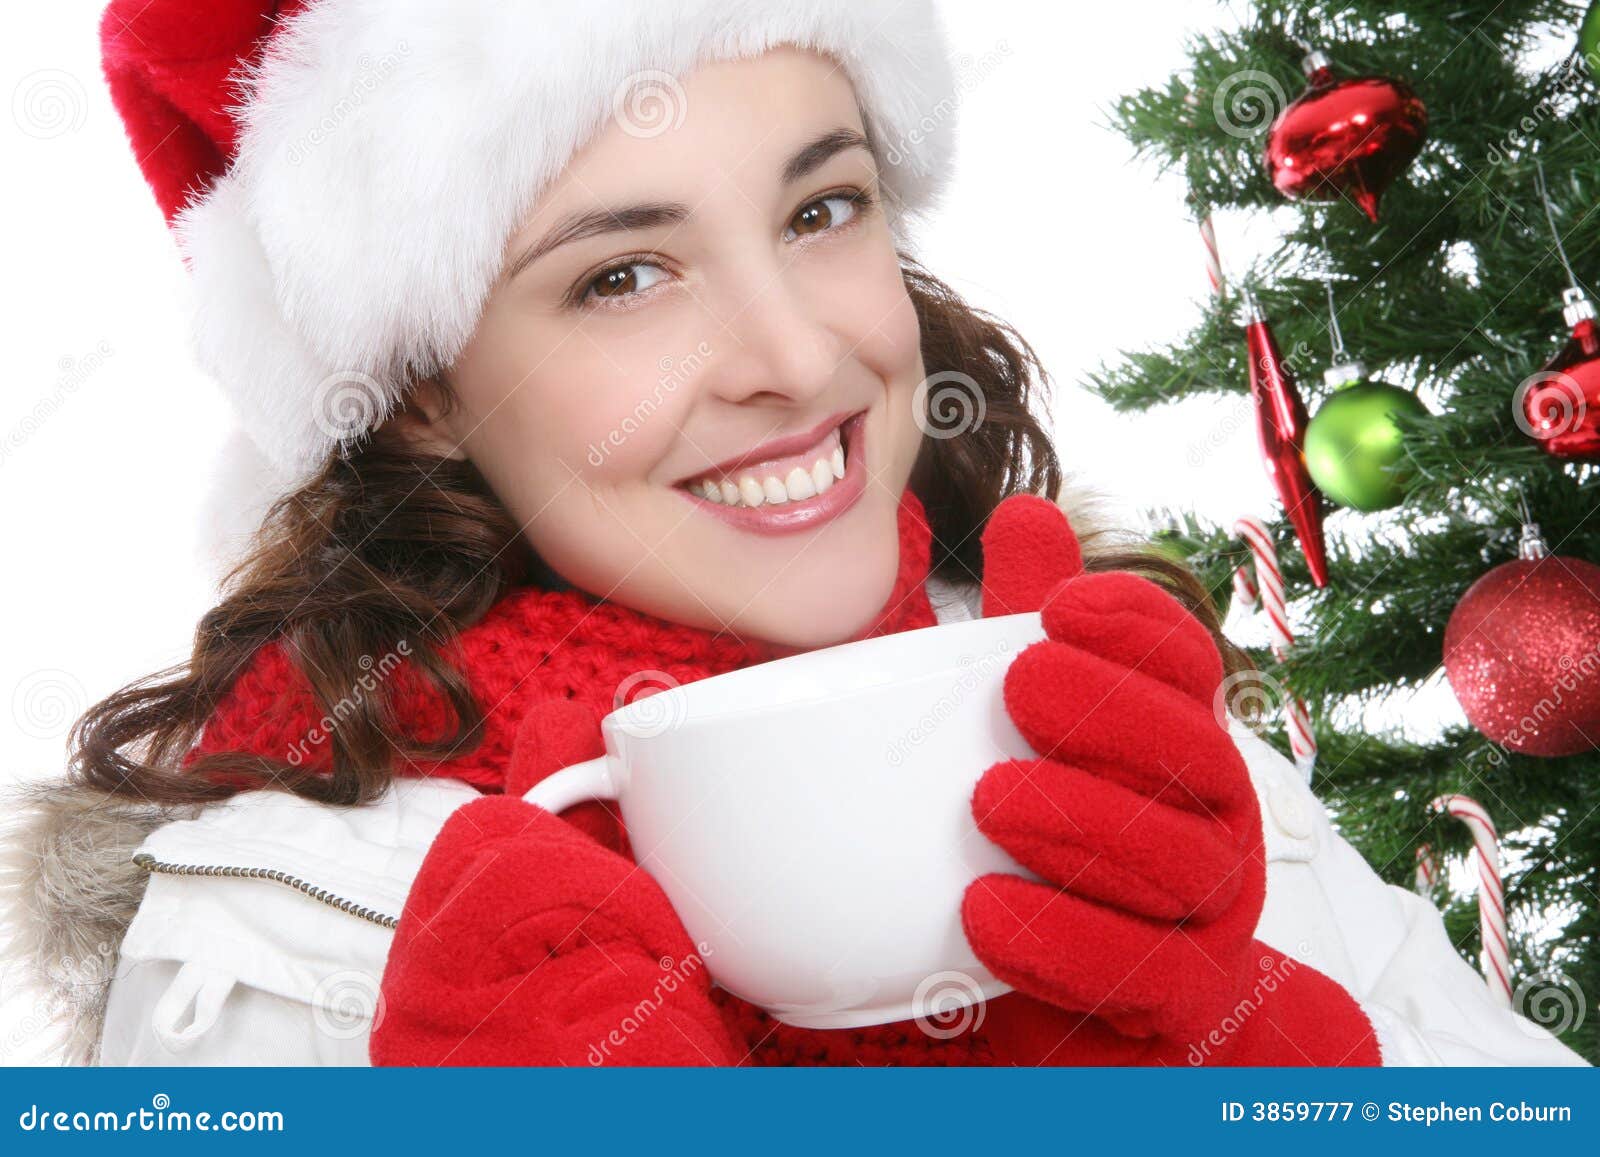 Woman Drinking Coffee stock image. Image of beauty, scarf - 3859777